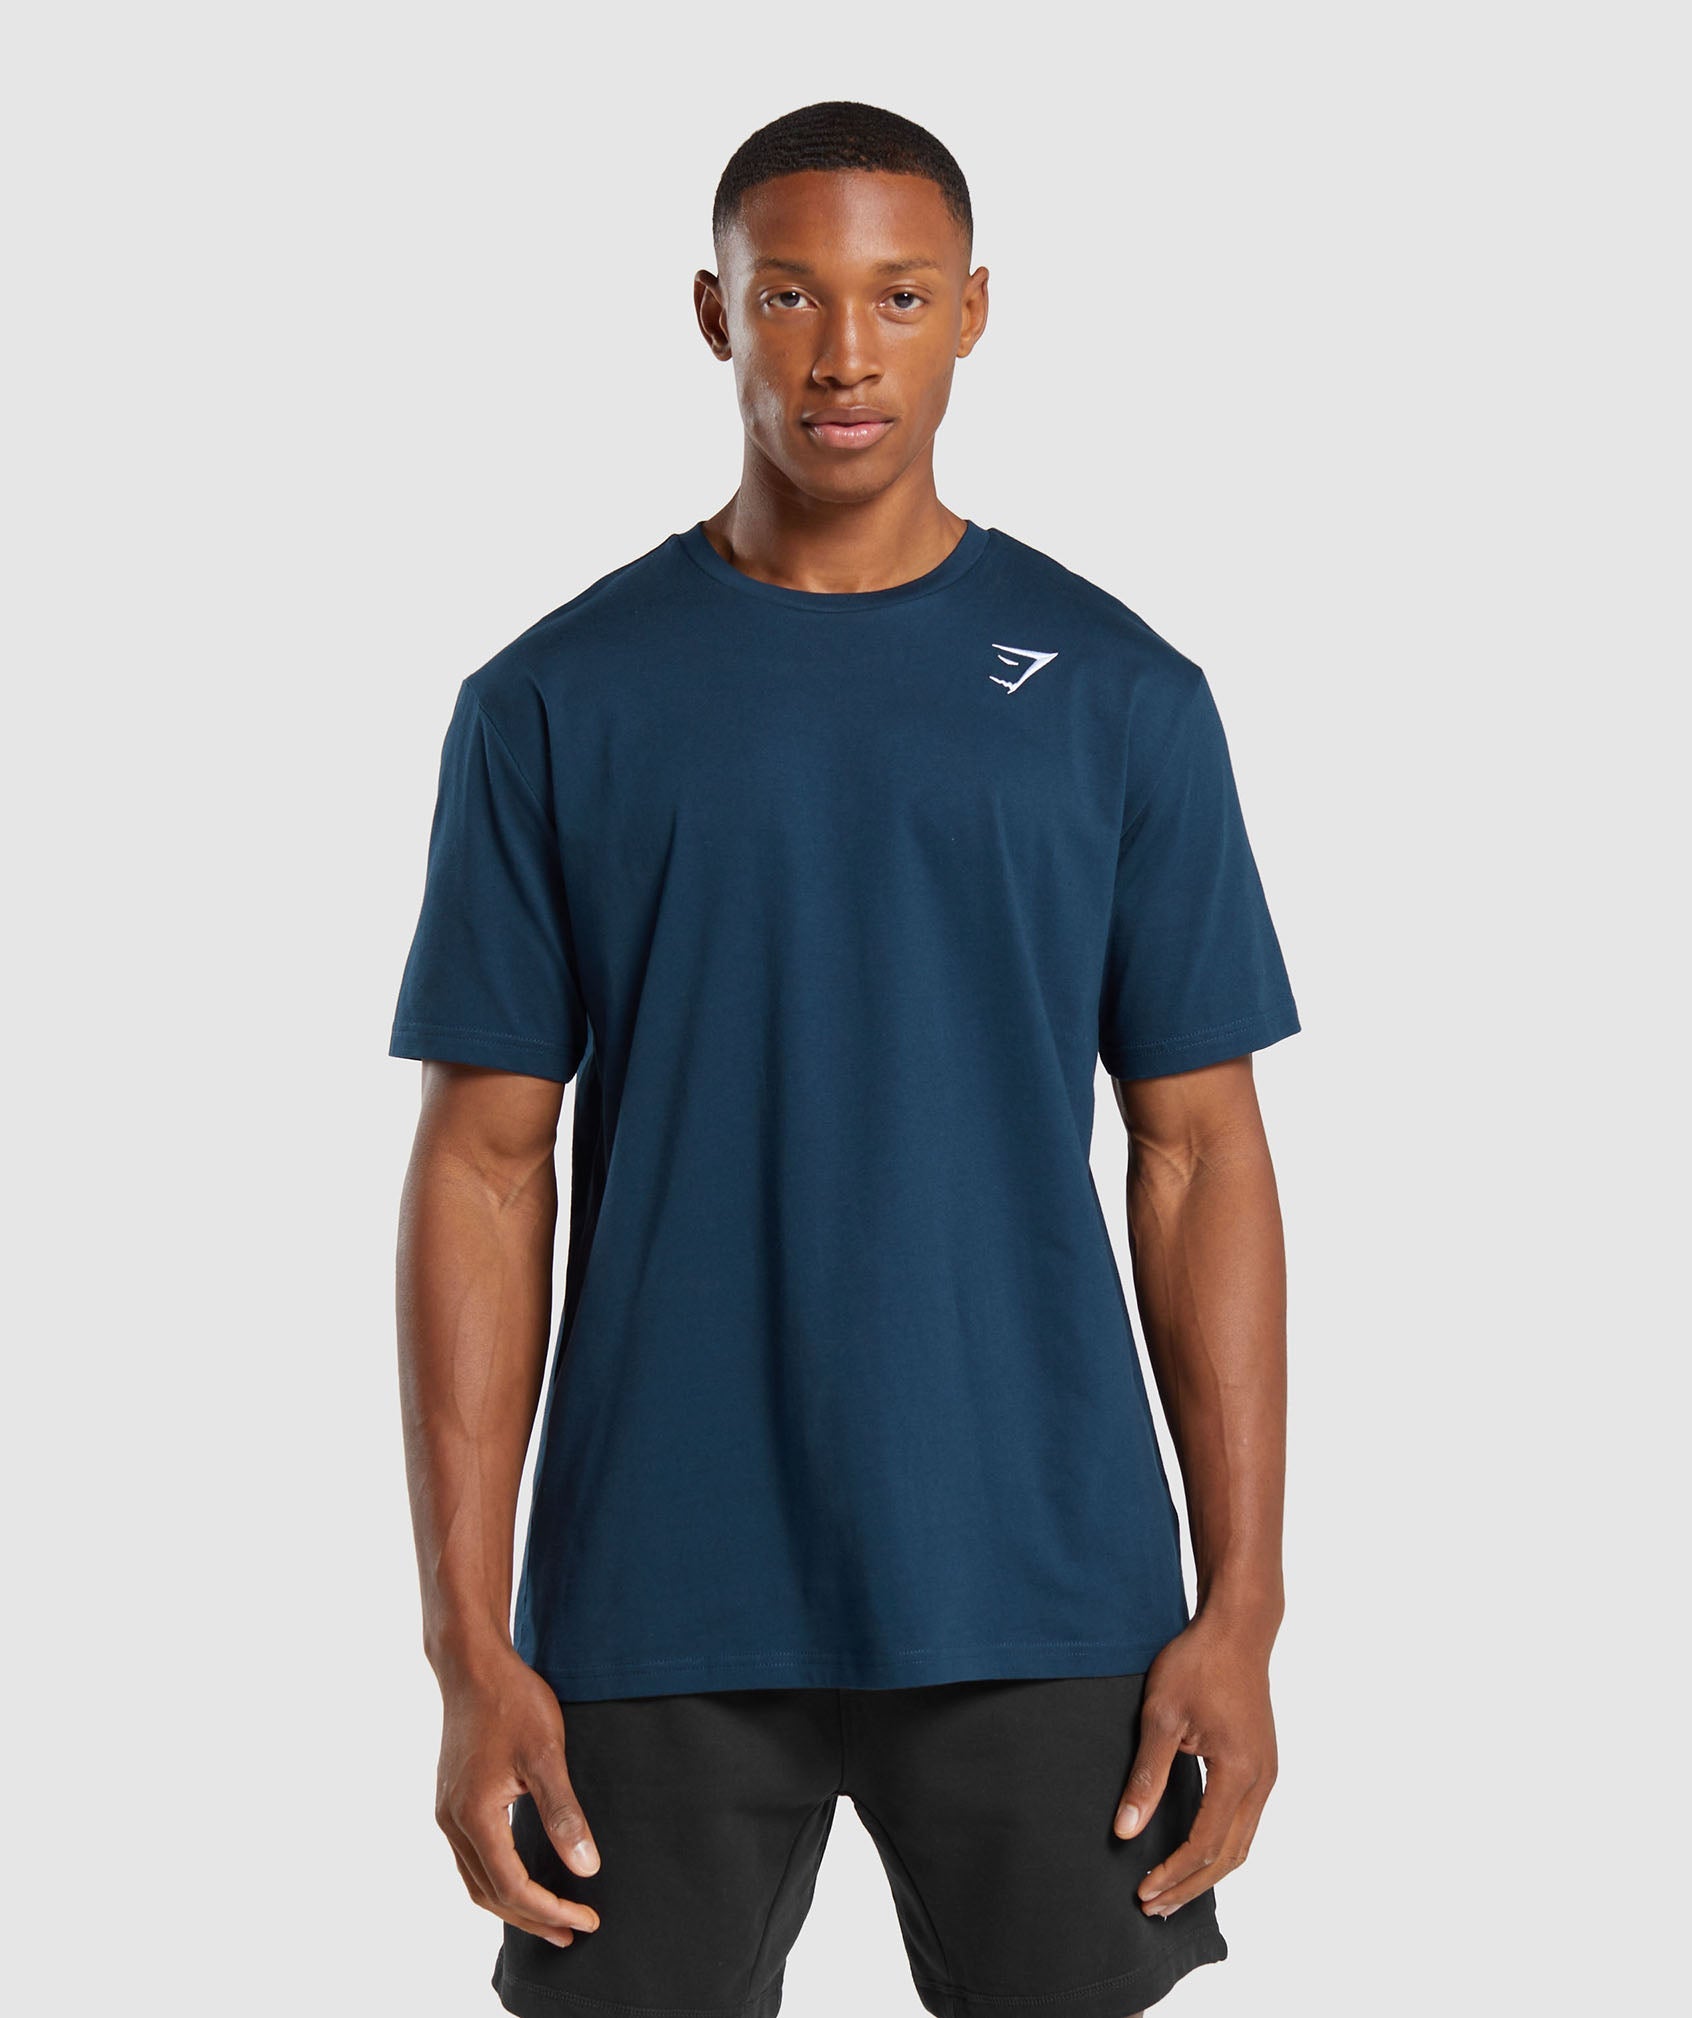 Crest T-Shirt in Navy is out of stock